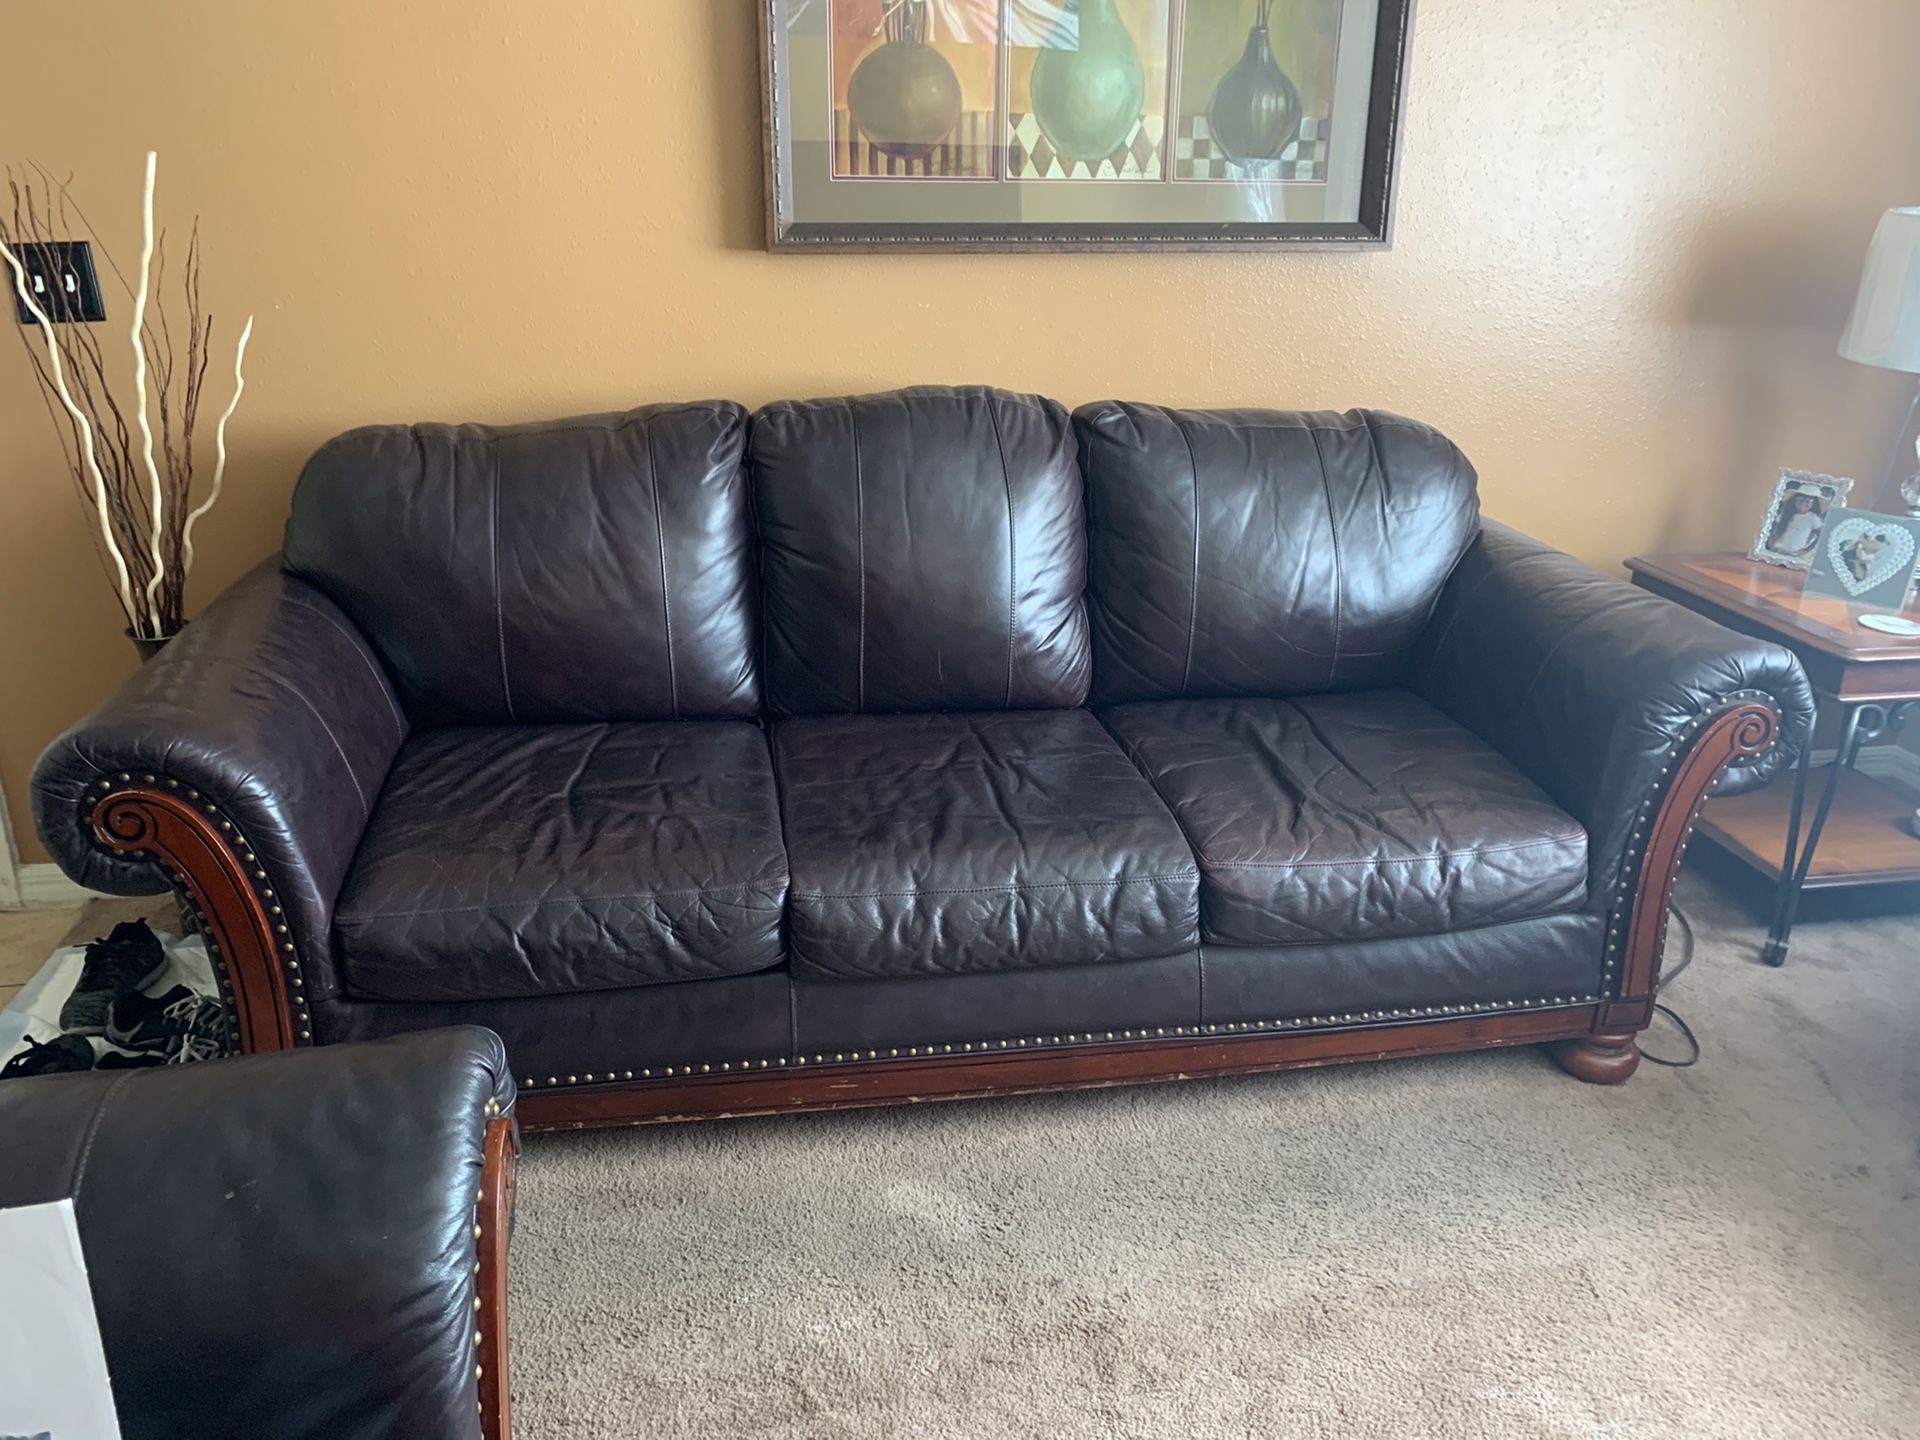 A sofa and a love seat plus 2 end table